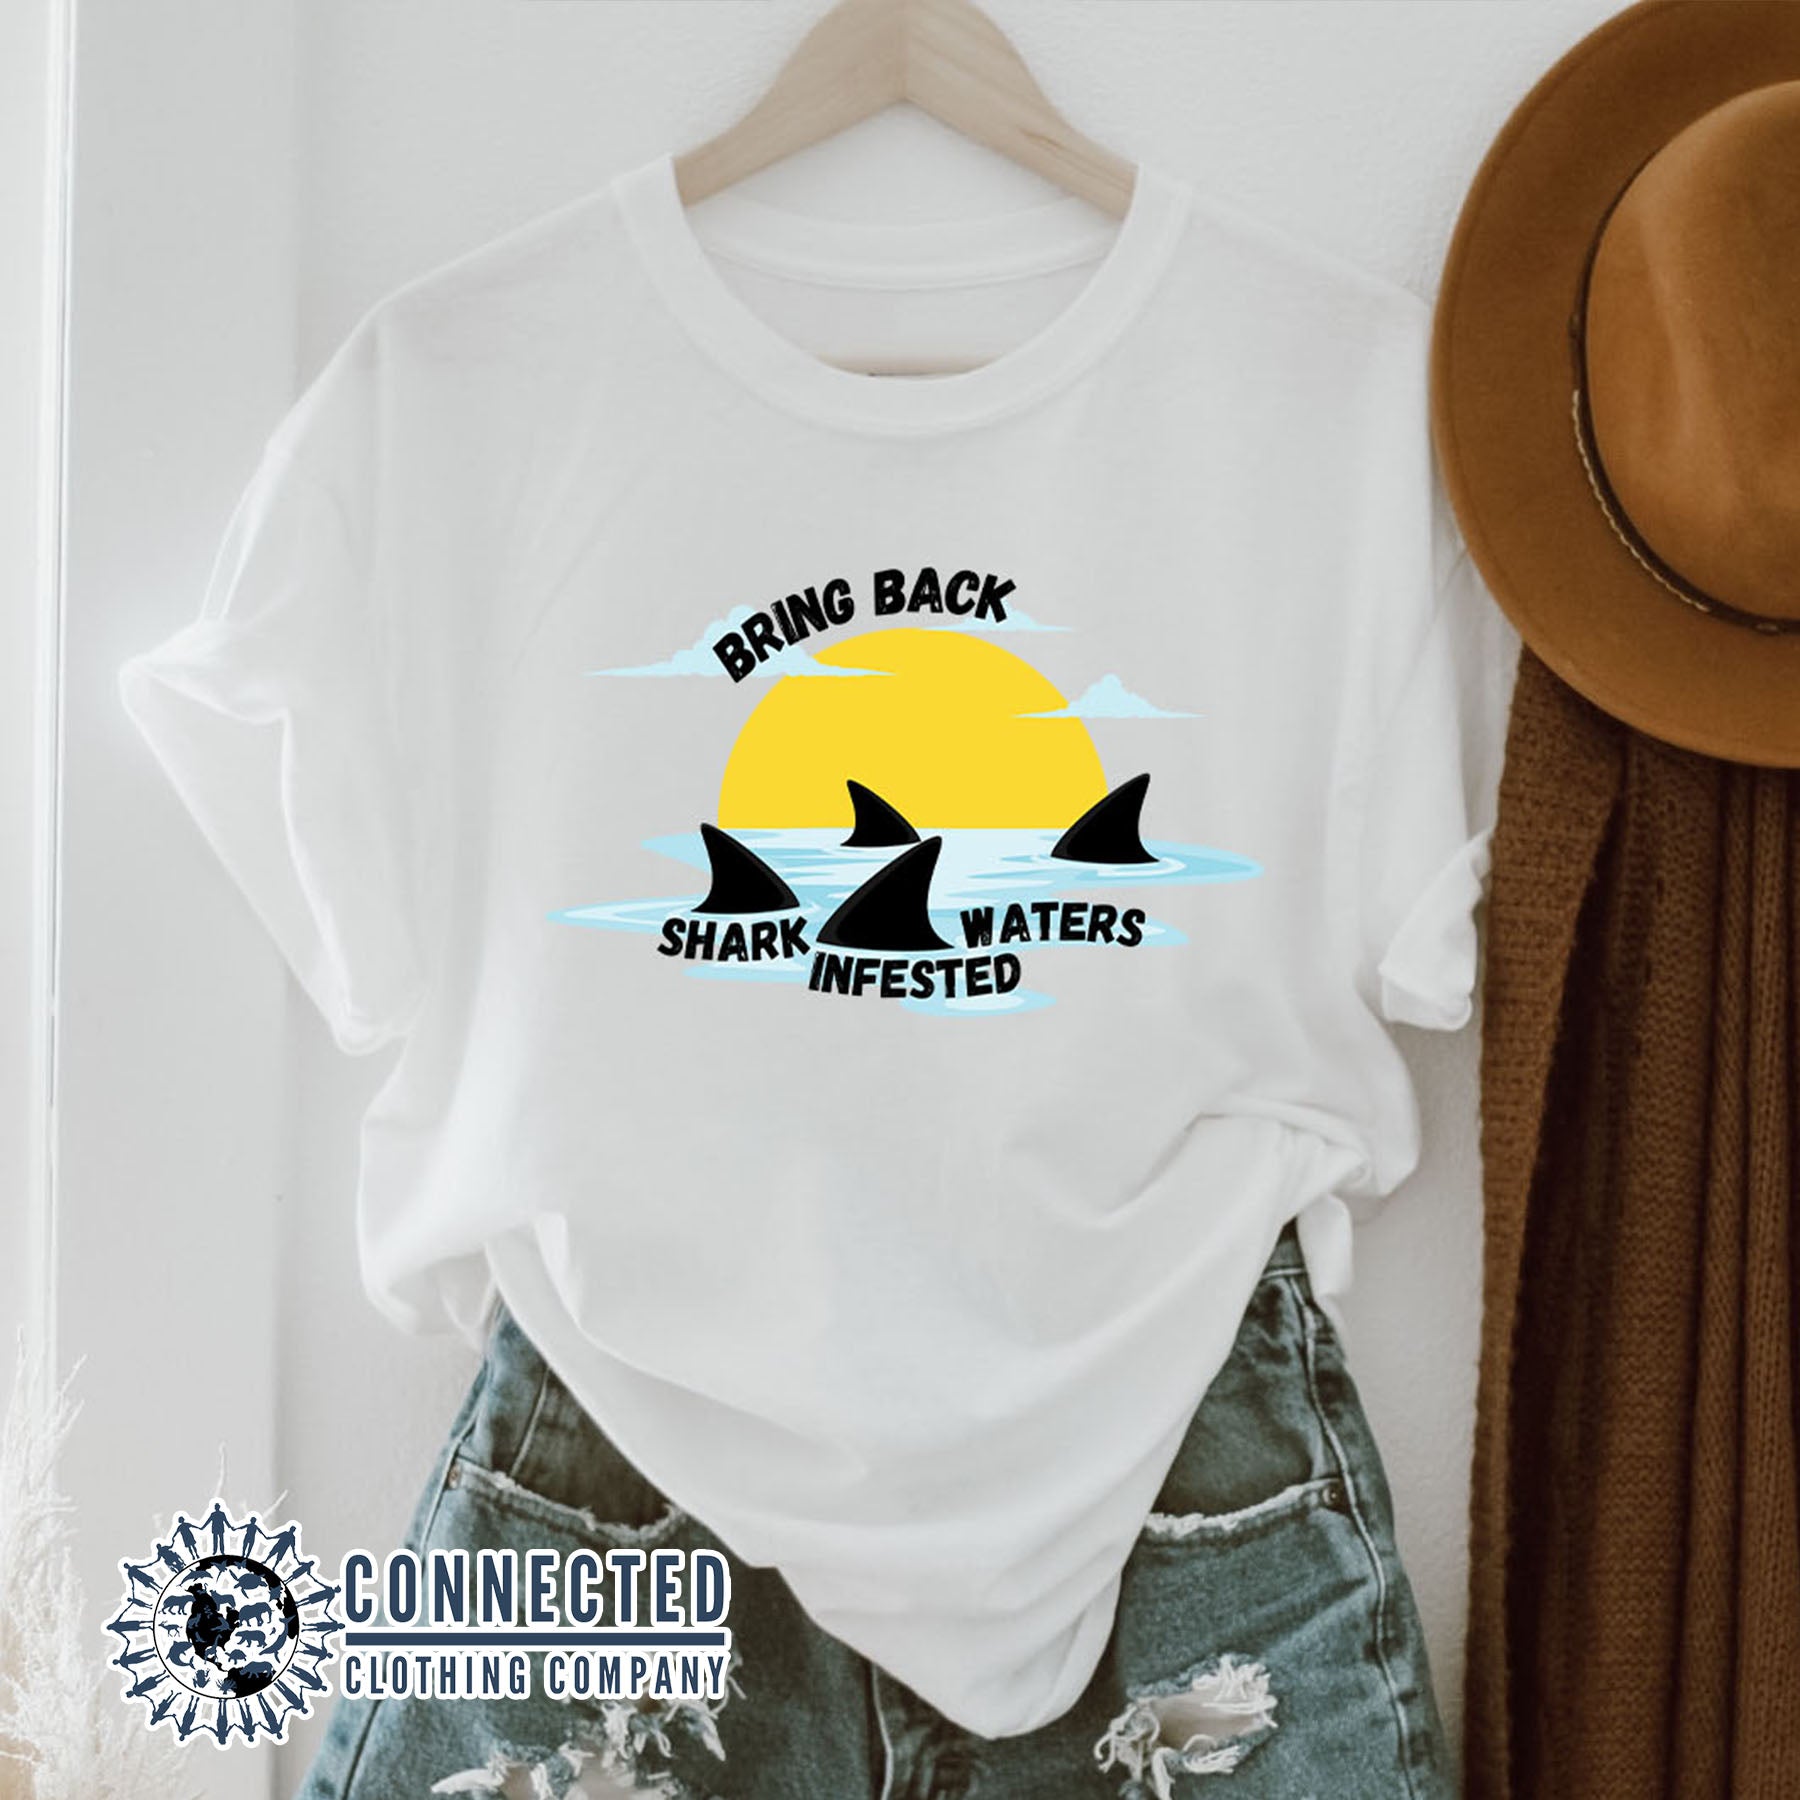 White Bring Back Shark Infested Waters Unisex Short-Sleeve Tee - Connected Clothing Company - Ethically and Sustainably Made - 10% of profits donated to shark conservation and ocean conservation